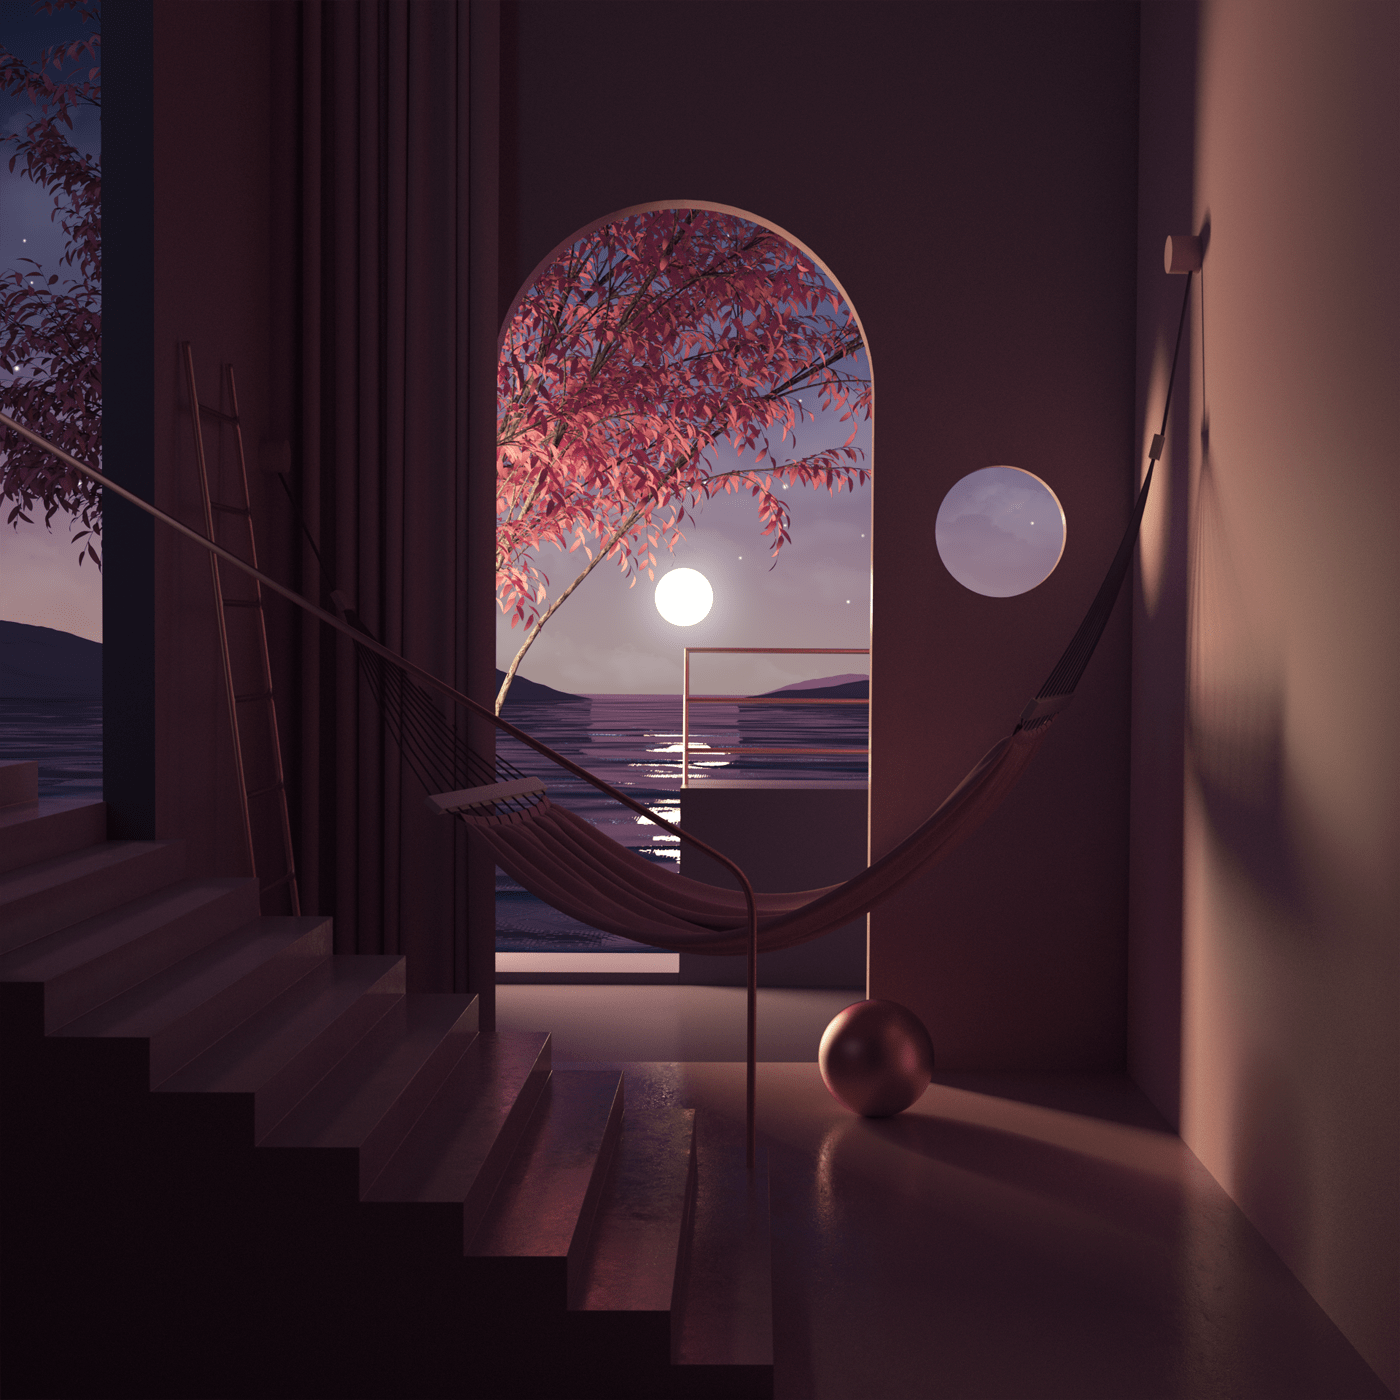 A digital image of a room with a hammock, stairs, and a window with a view of the sea at night. - 3D